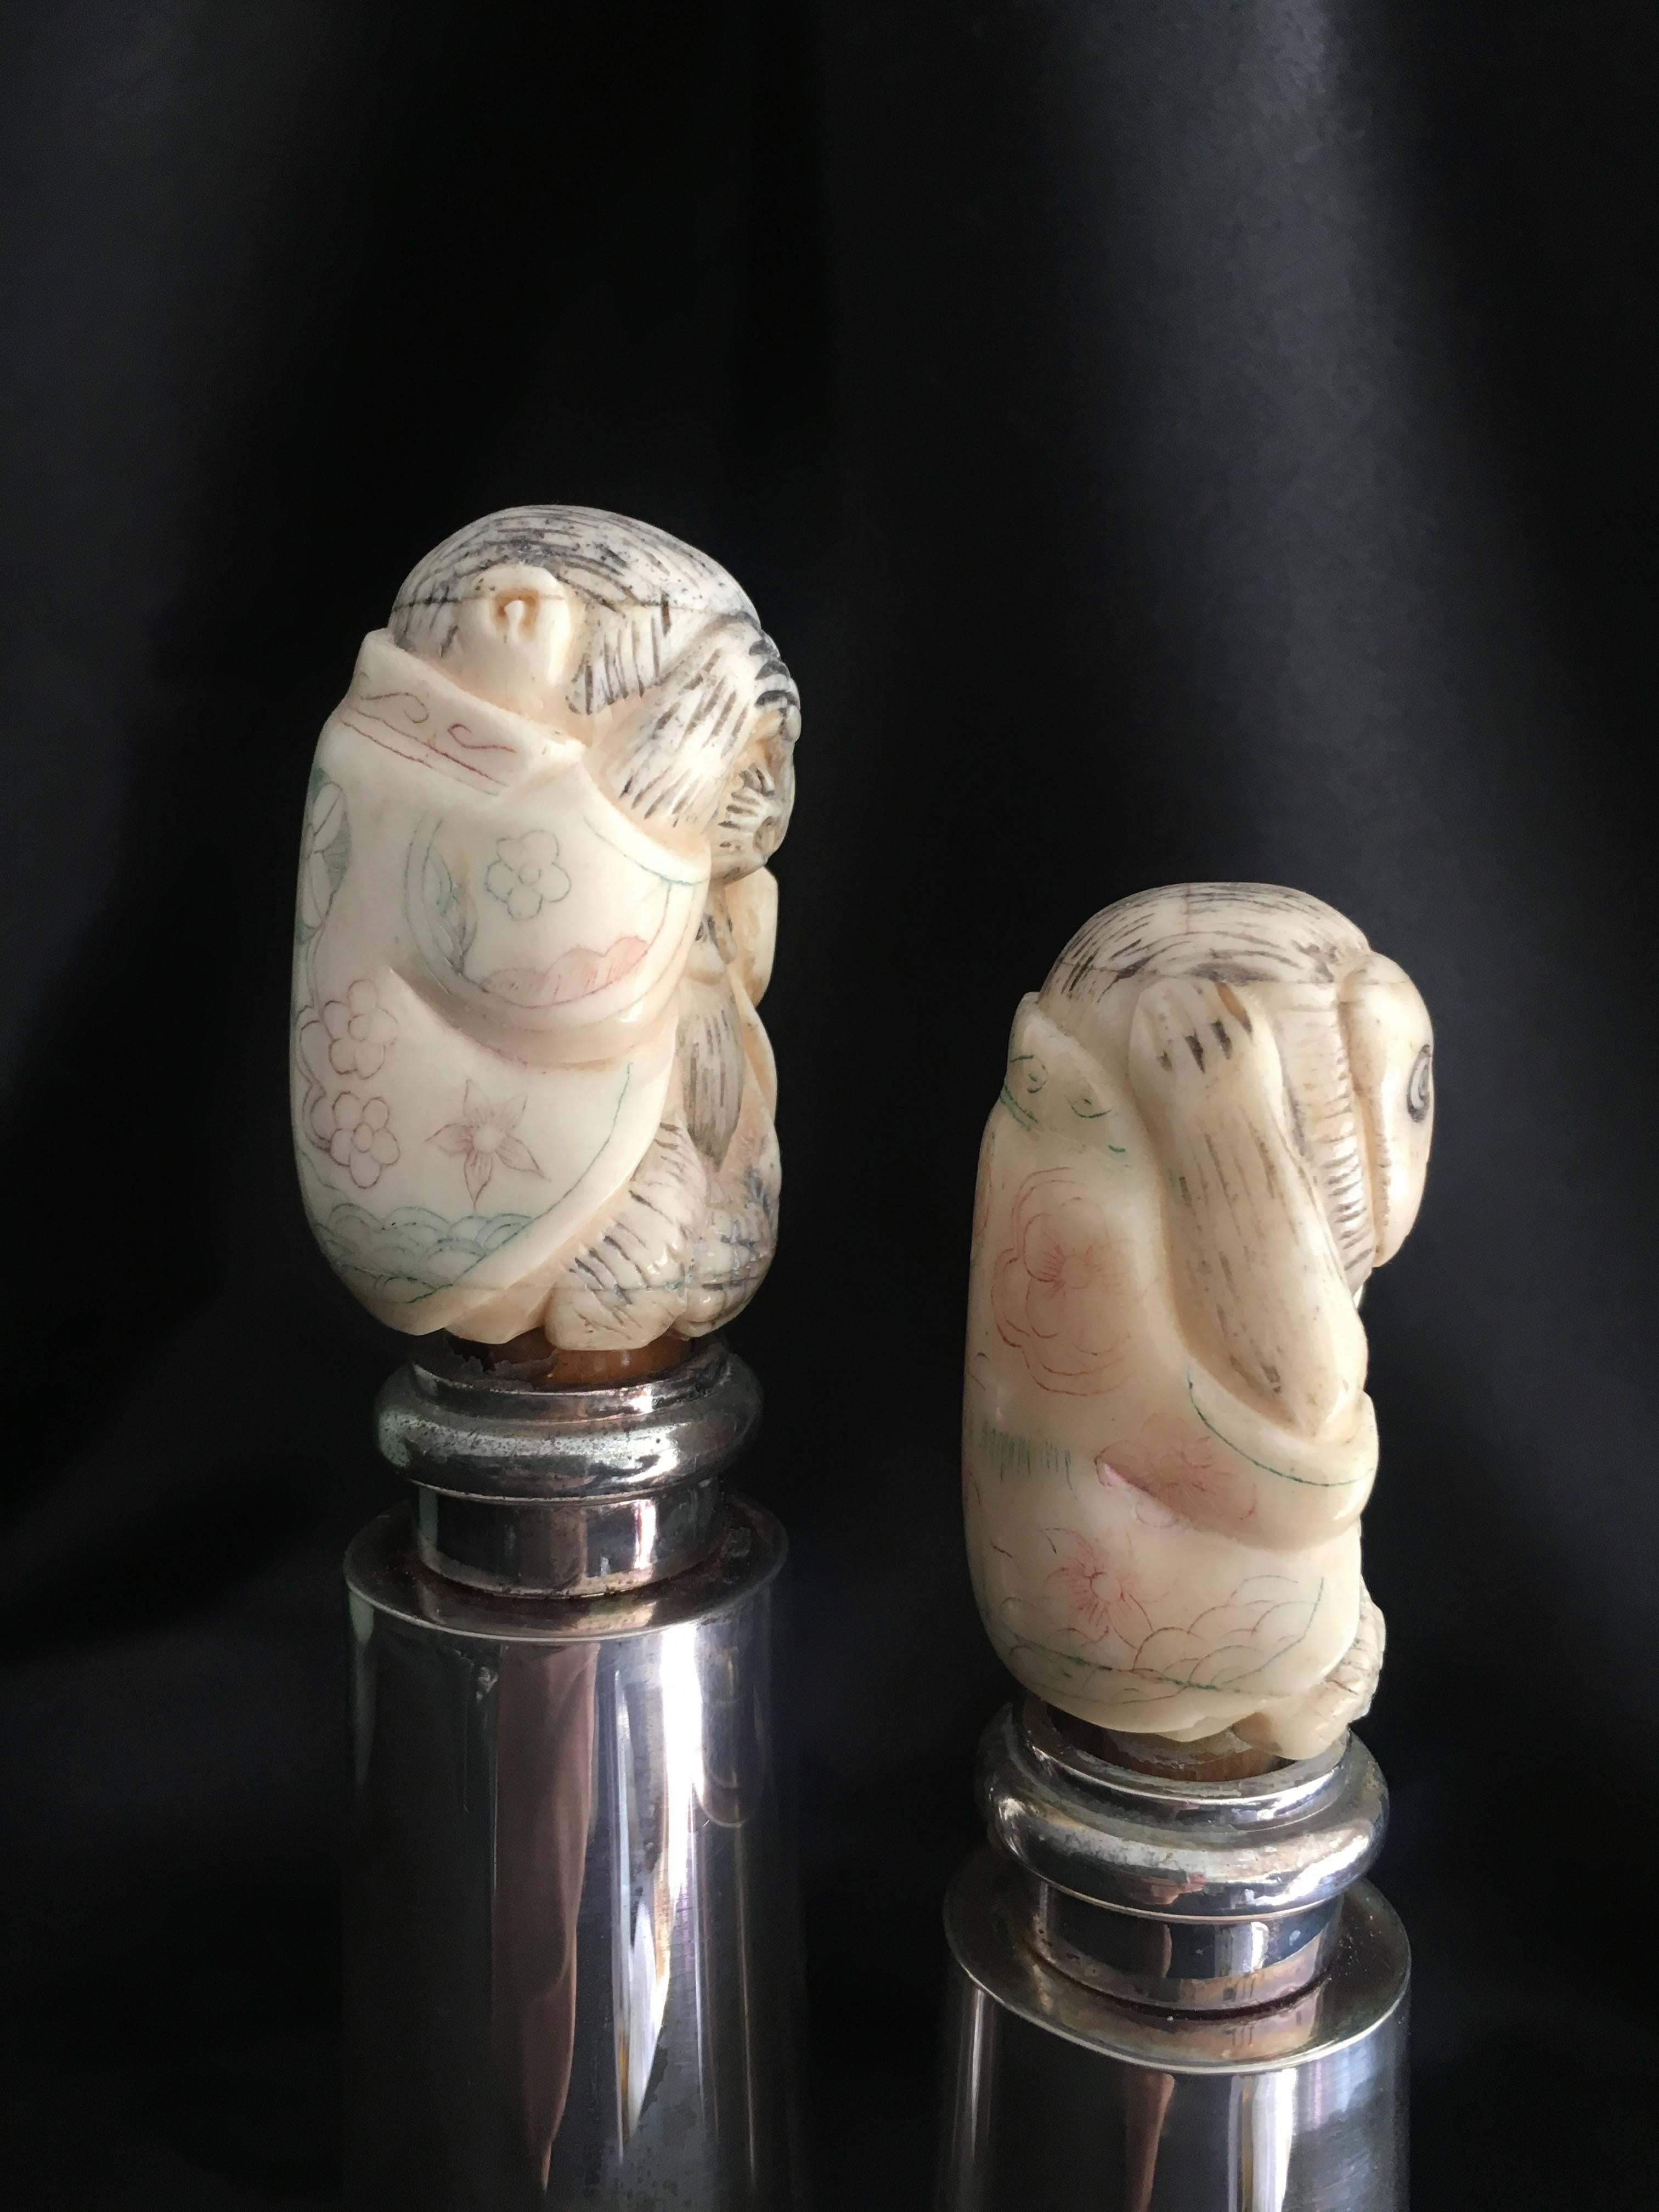 Hans Turnwald Art carved bone salt and pepper shakers / grinders
Perfect for the artists table to start any conversation with guests who have a sense of style and ready to chat about Art and Commerce!

The pair grind not shaken sea salt to pepper